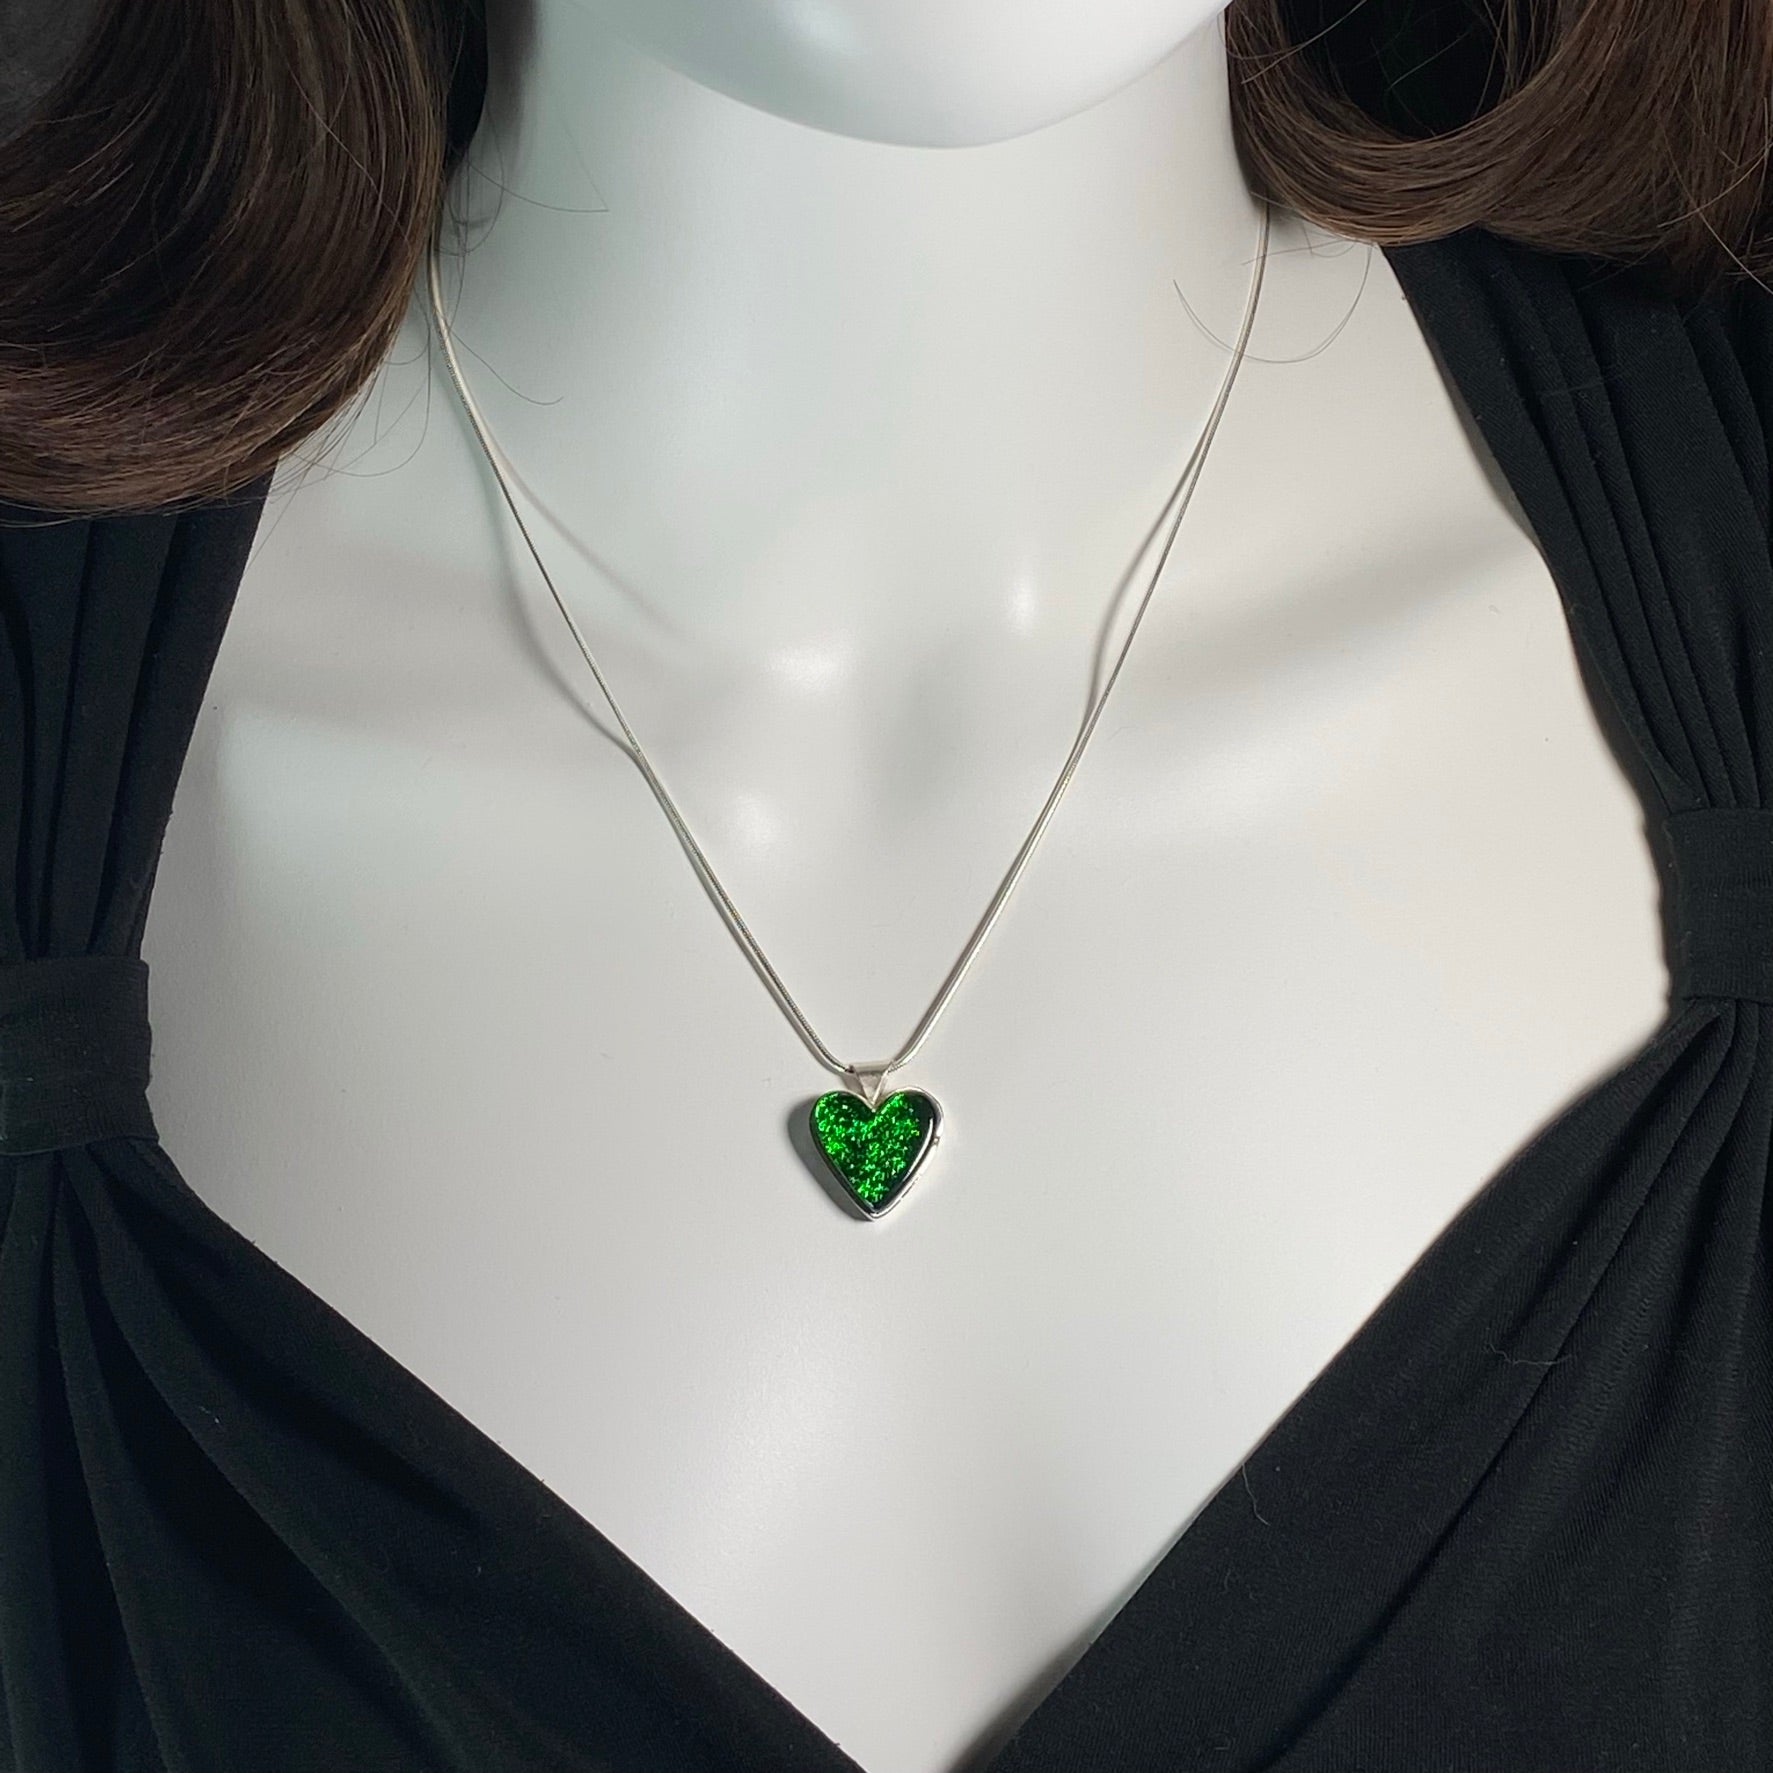 Bright emerald green heart necklace, fused glass, glass jewelry, glass and silver jewelry, handmade, handcrafted, American Craft, hand fabricated jewelry, hand fabricated jewellery, Athens, Georgia, colorful jewelry, sparkle, bullseye glass, dichroic glass, art jewelry